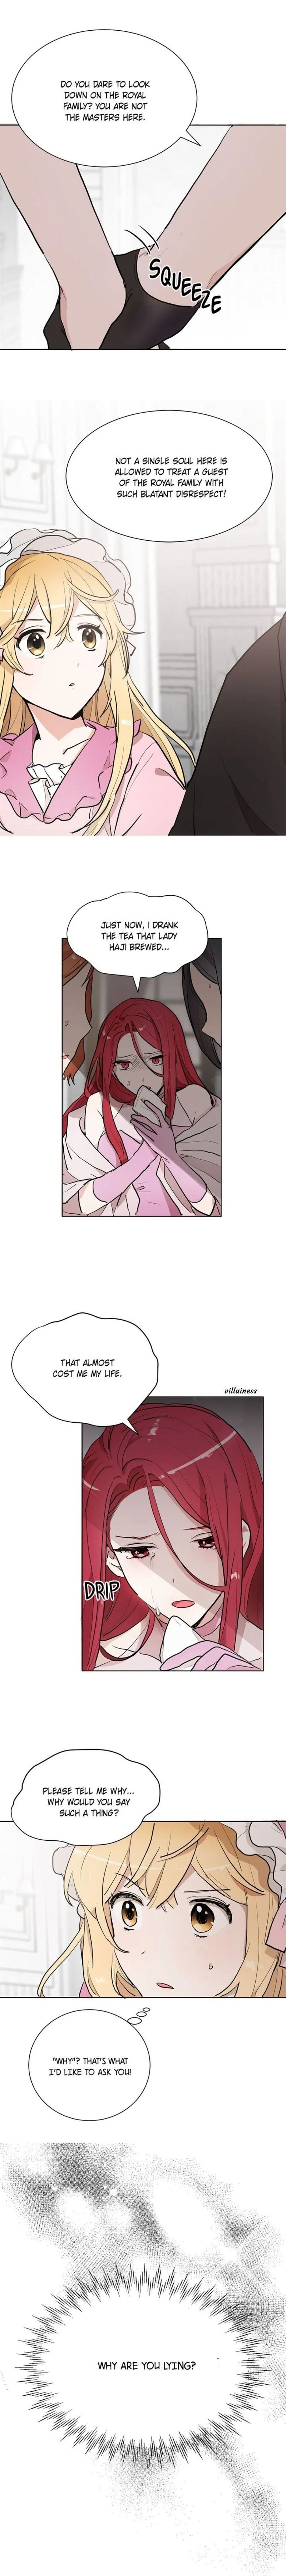 Cat's Bride Chapter 50 page 2